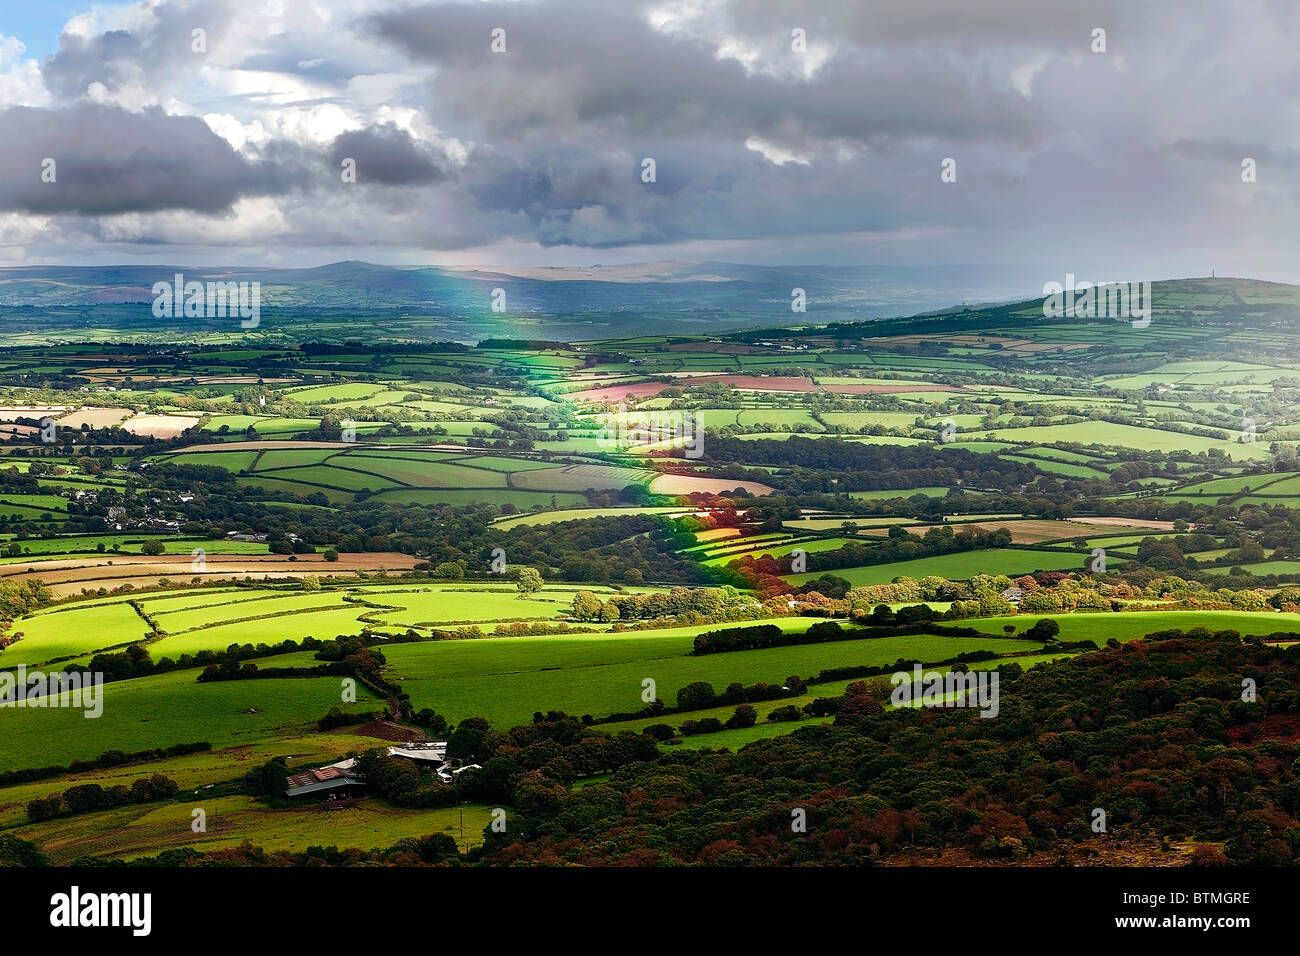 A rainbow arcs over the landscape from a viewpoint on Bodmin Moor, Cornwall. The hills of Dartmoor, Devon, in background. Stock Photo